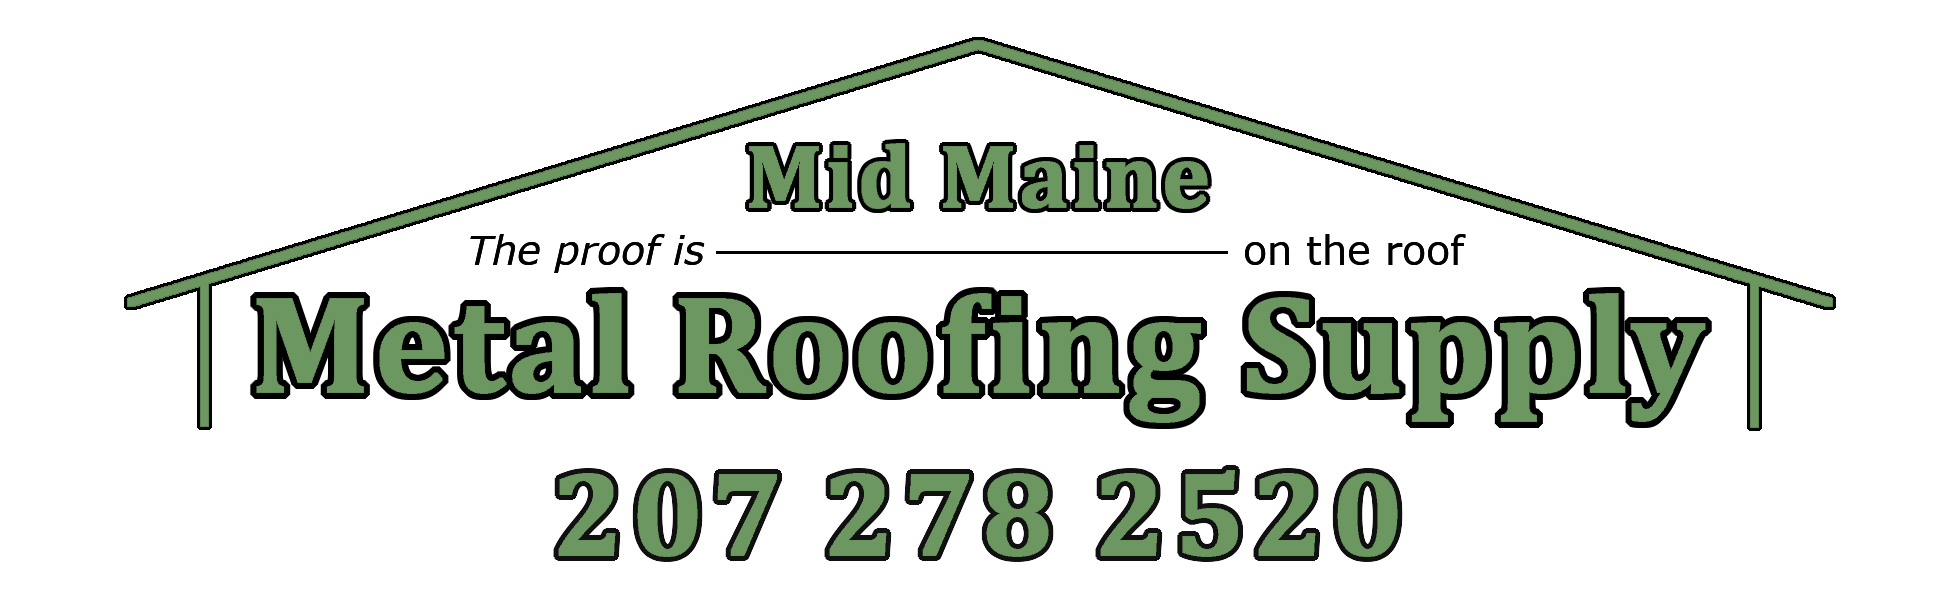 Mid Maine Metal Roofing Supply - 207-278-2520